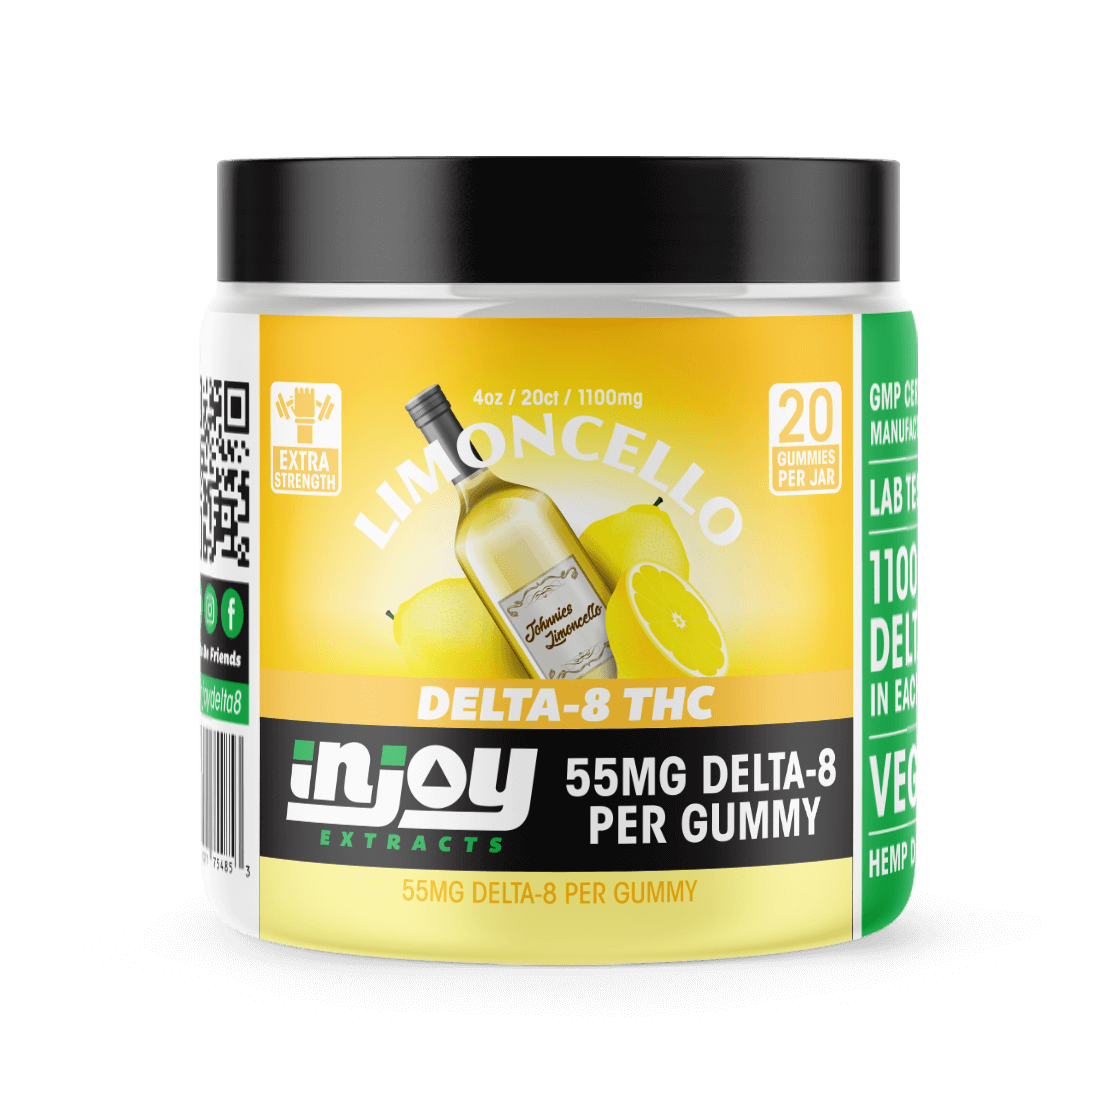 50mg Delta 8 Gummies - Lemon Flavored - Injoy Extracts